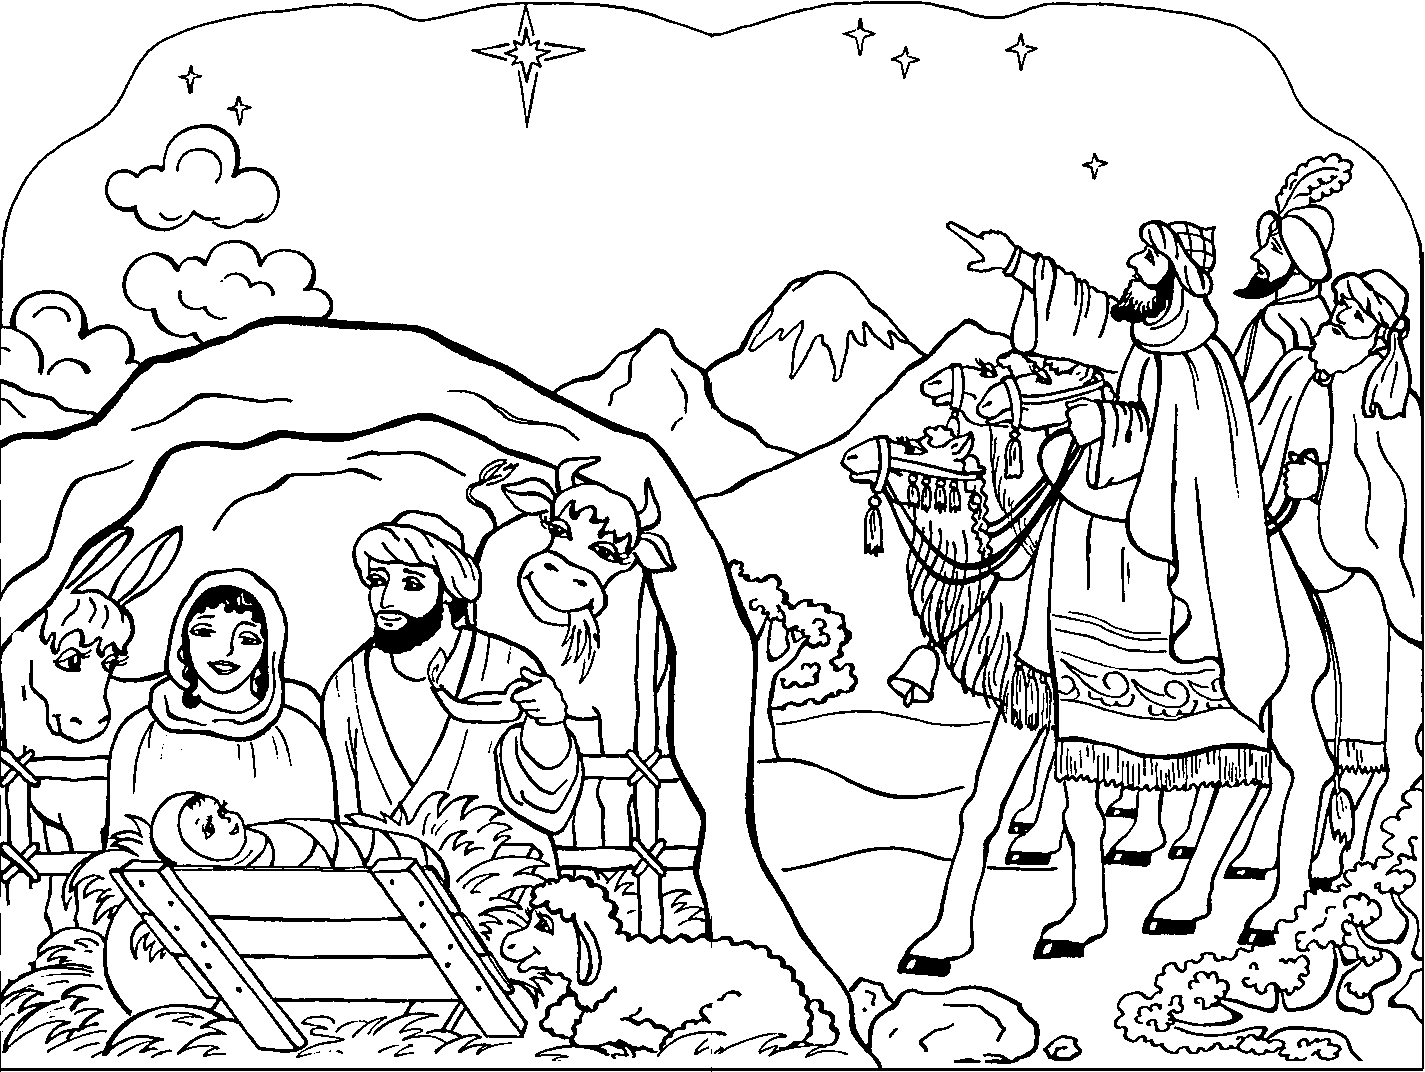 coloring page nativity scene free printable nativity coloring pages for kids scene page nativity coloring 